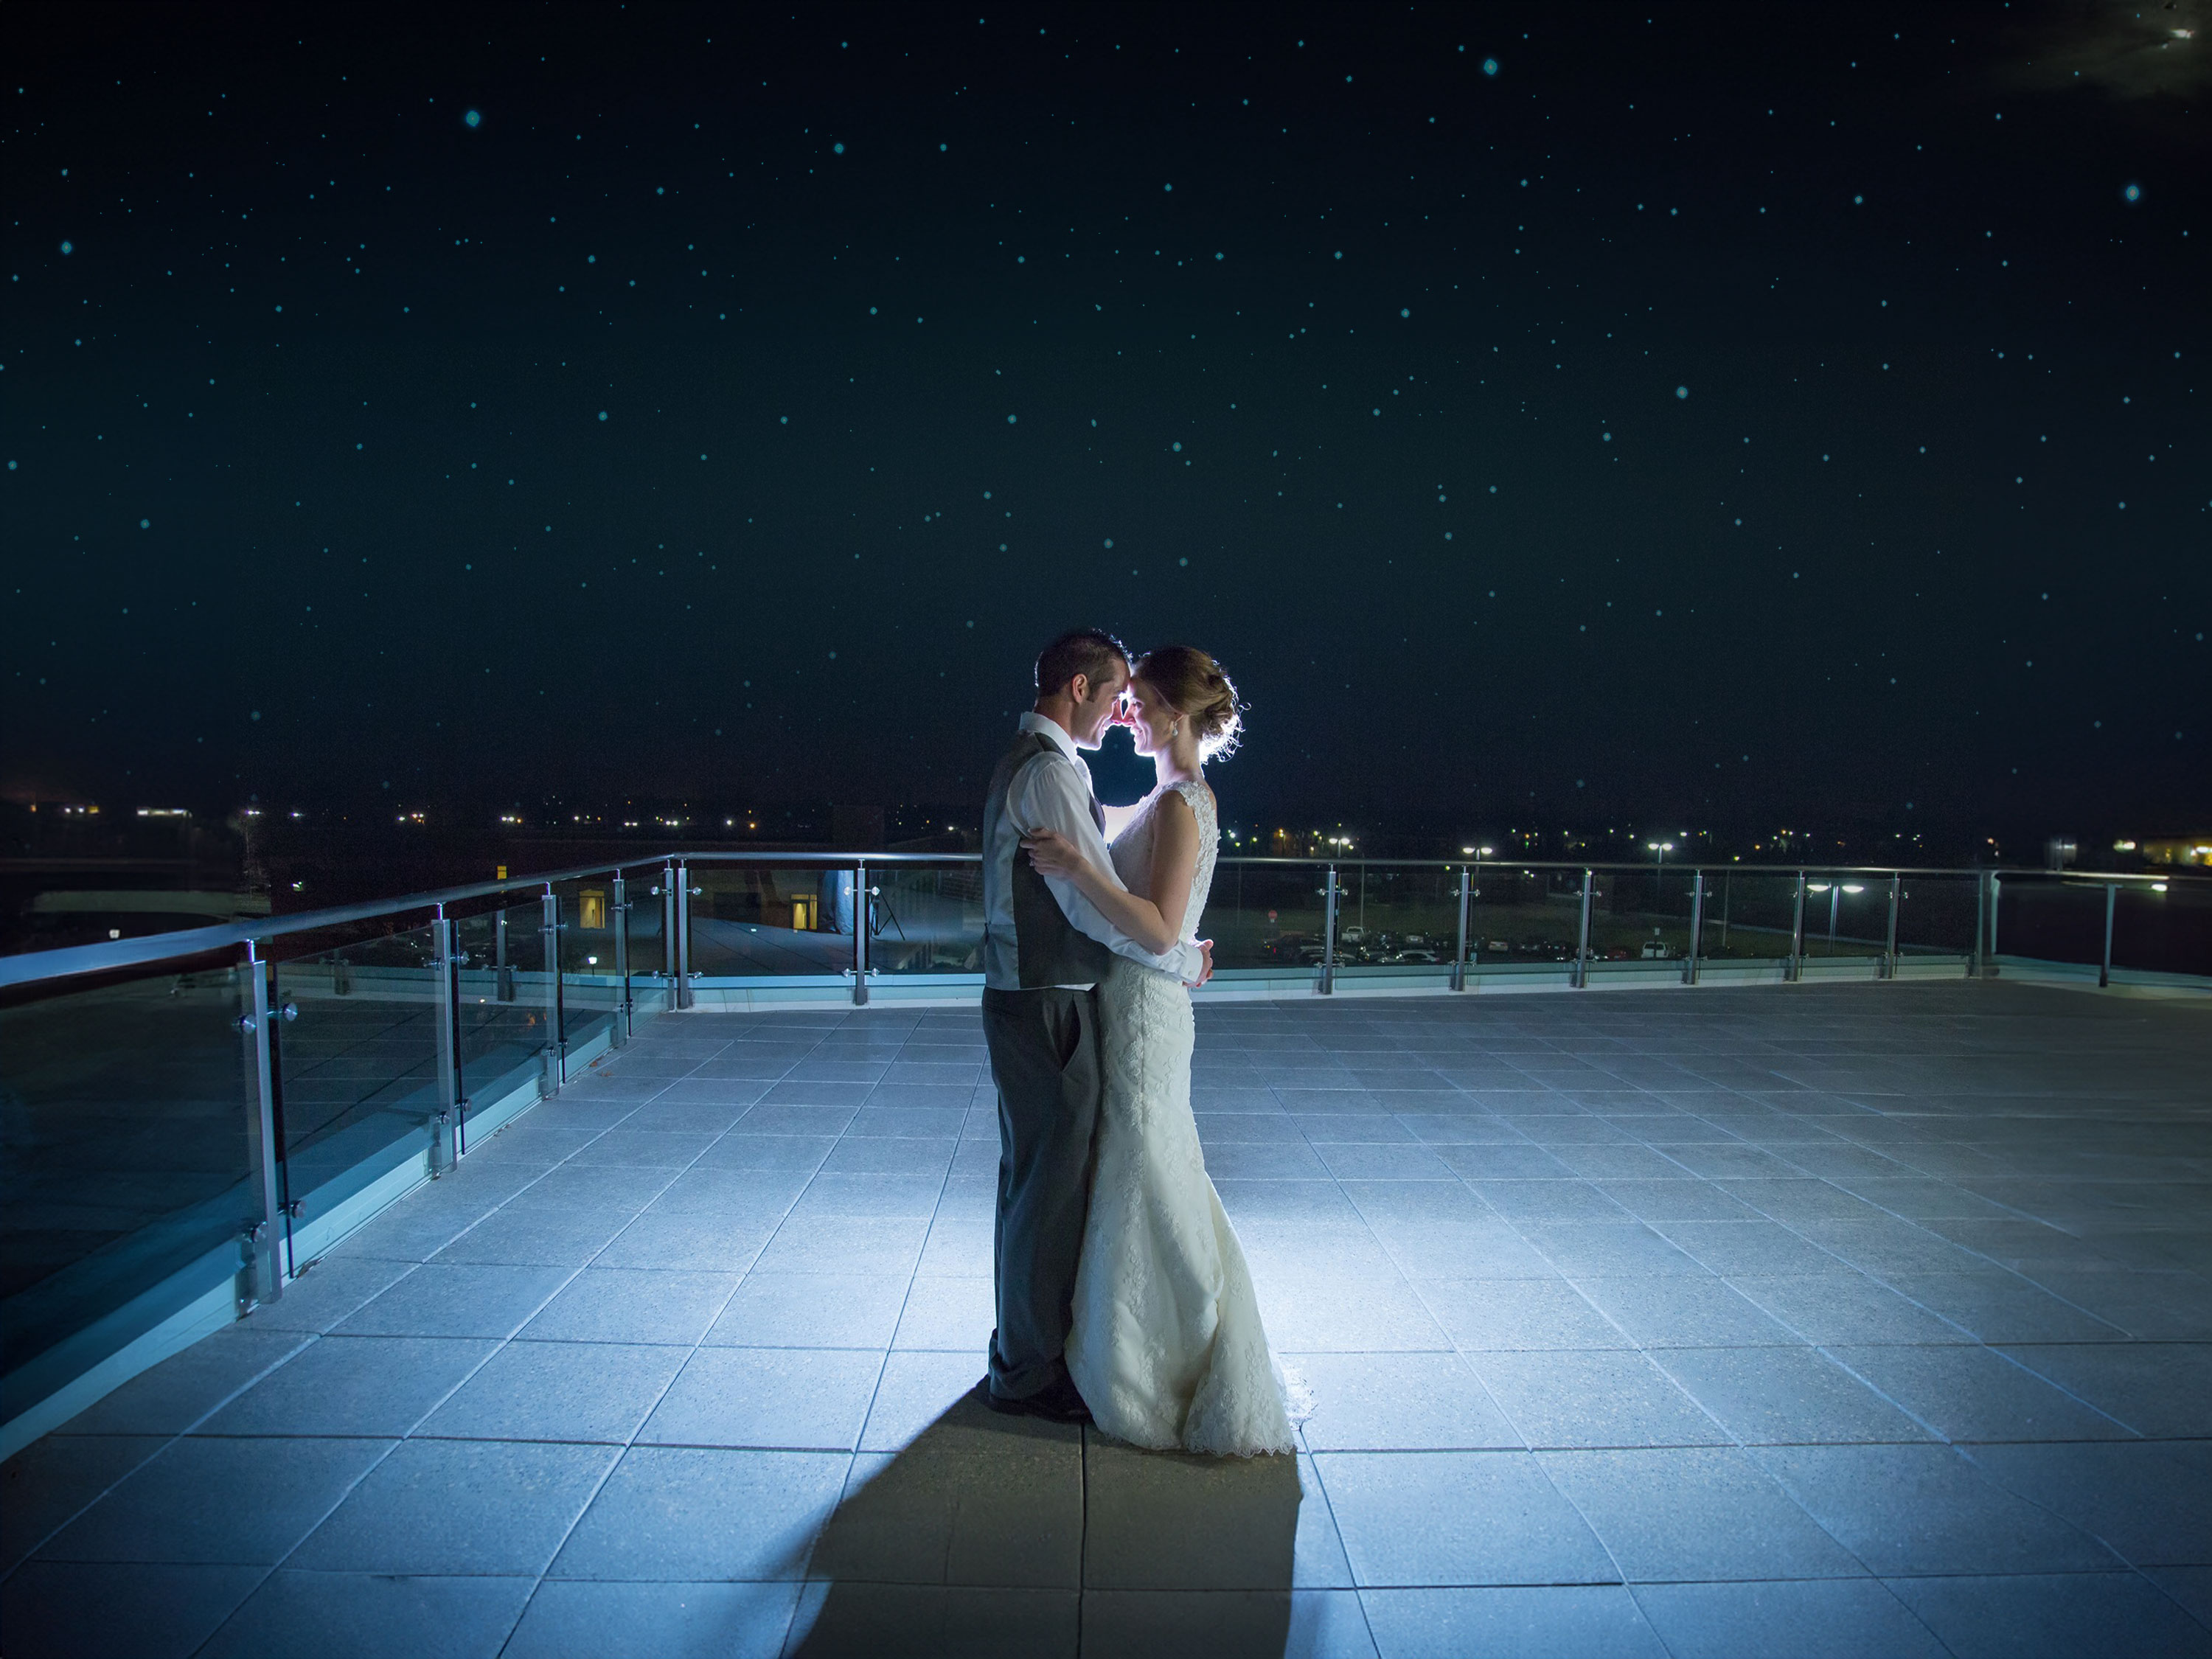 Newlywed couple dancing under the stars.